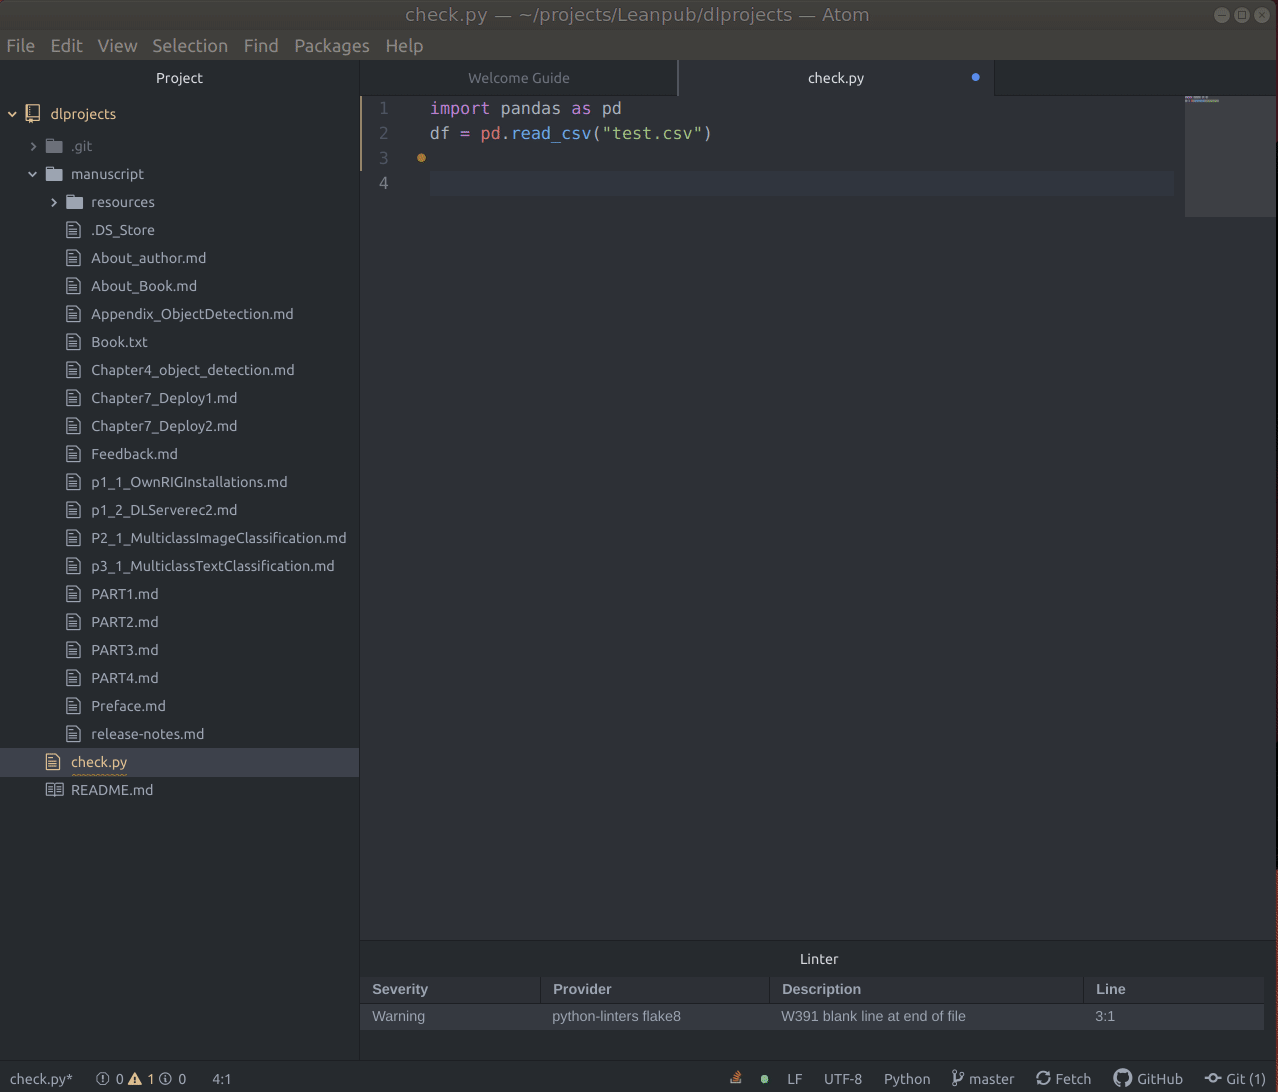 Access Stack Overflow in Atom using Ctrl+Alt+A.